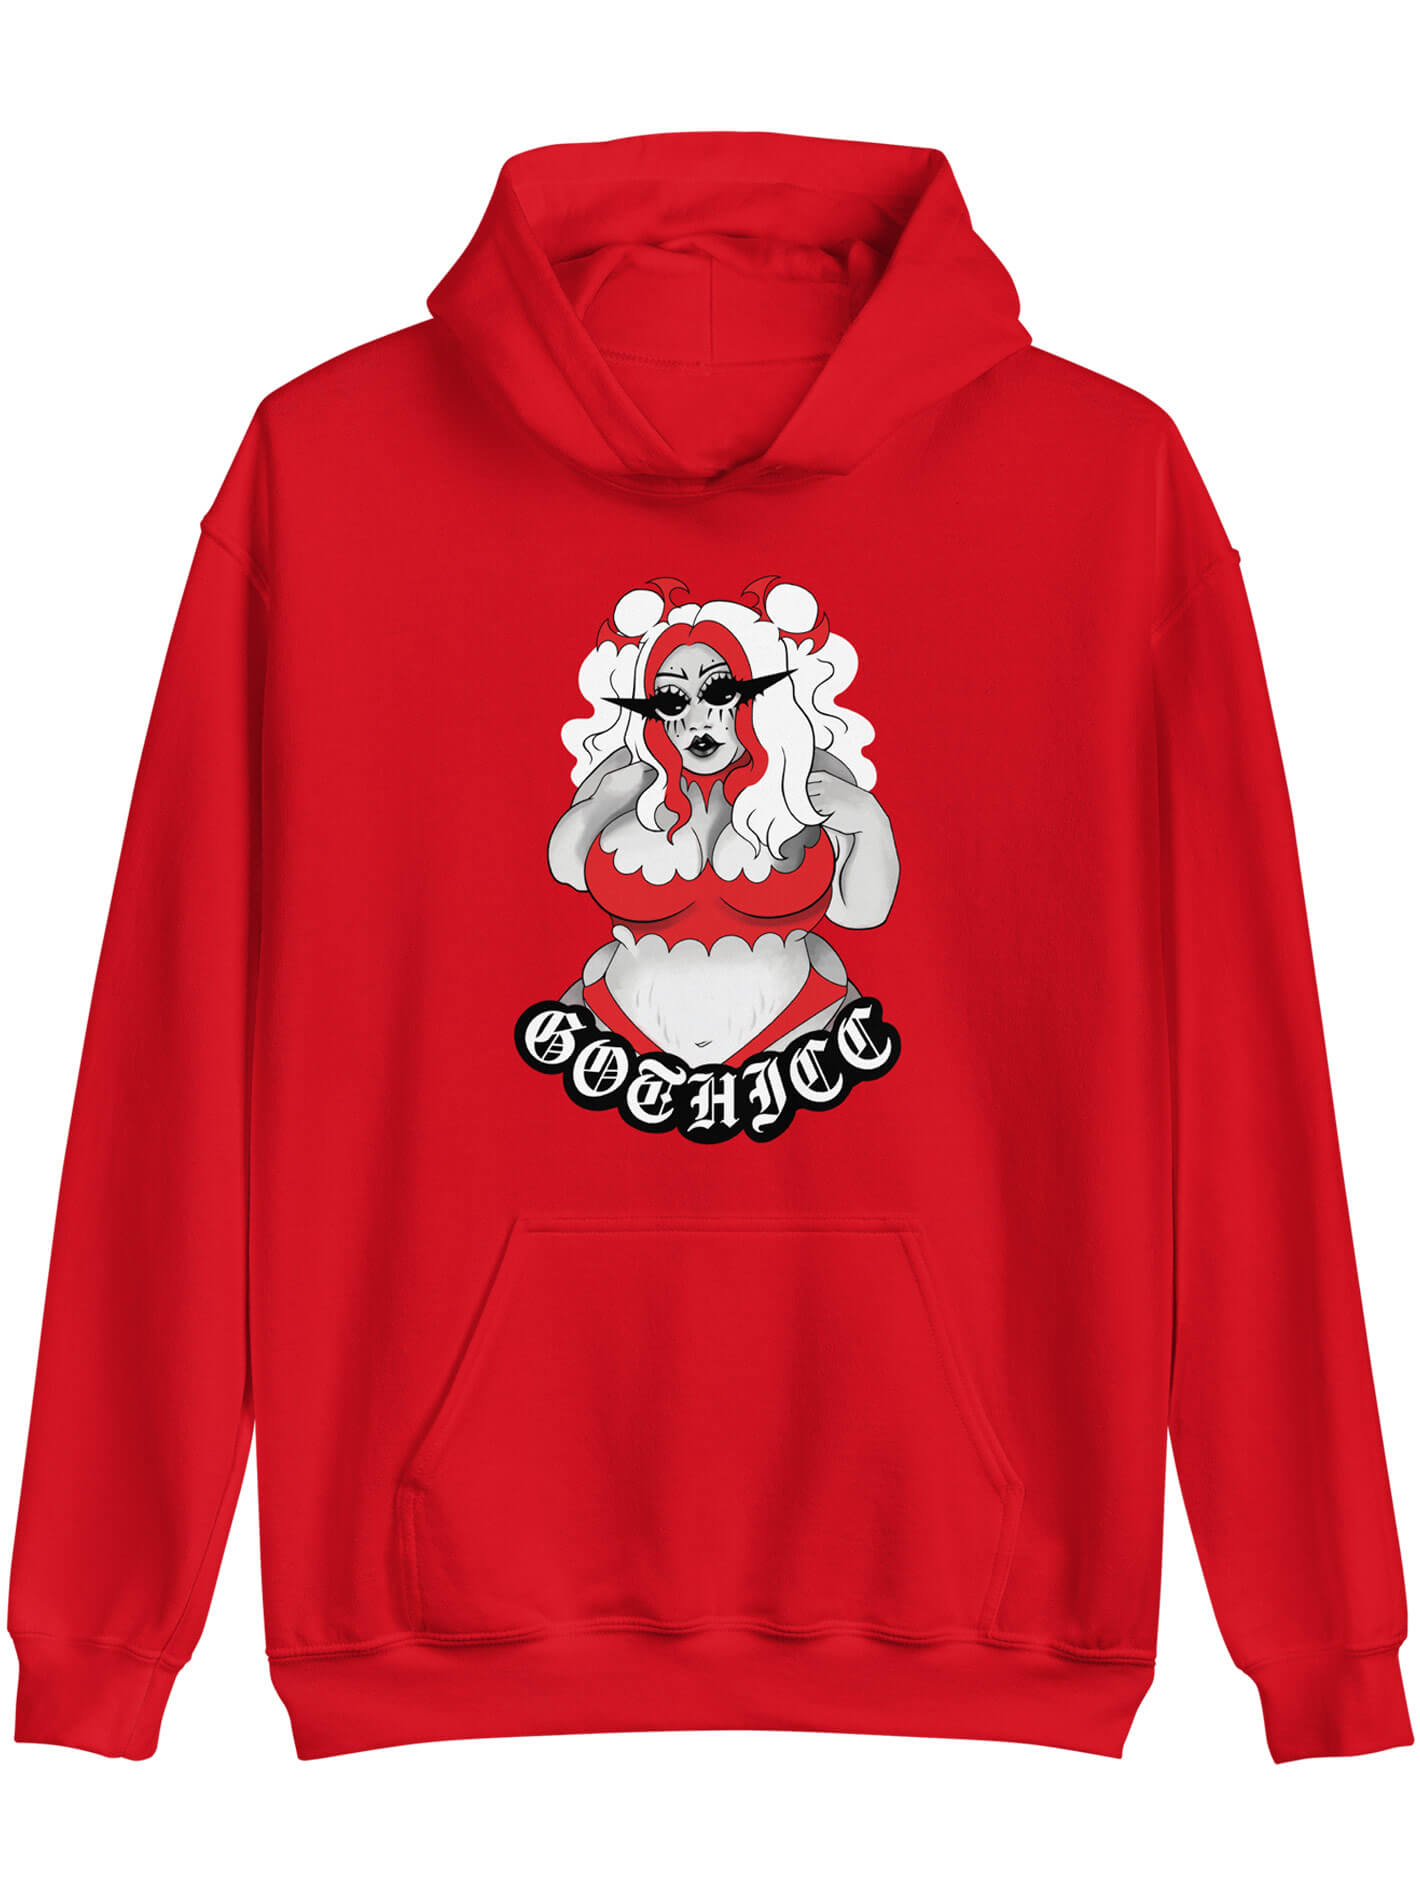 Gothicc pinup plus size hoodie.